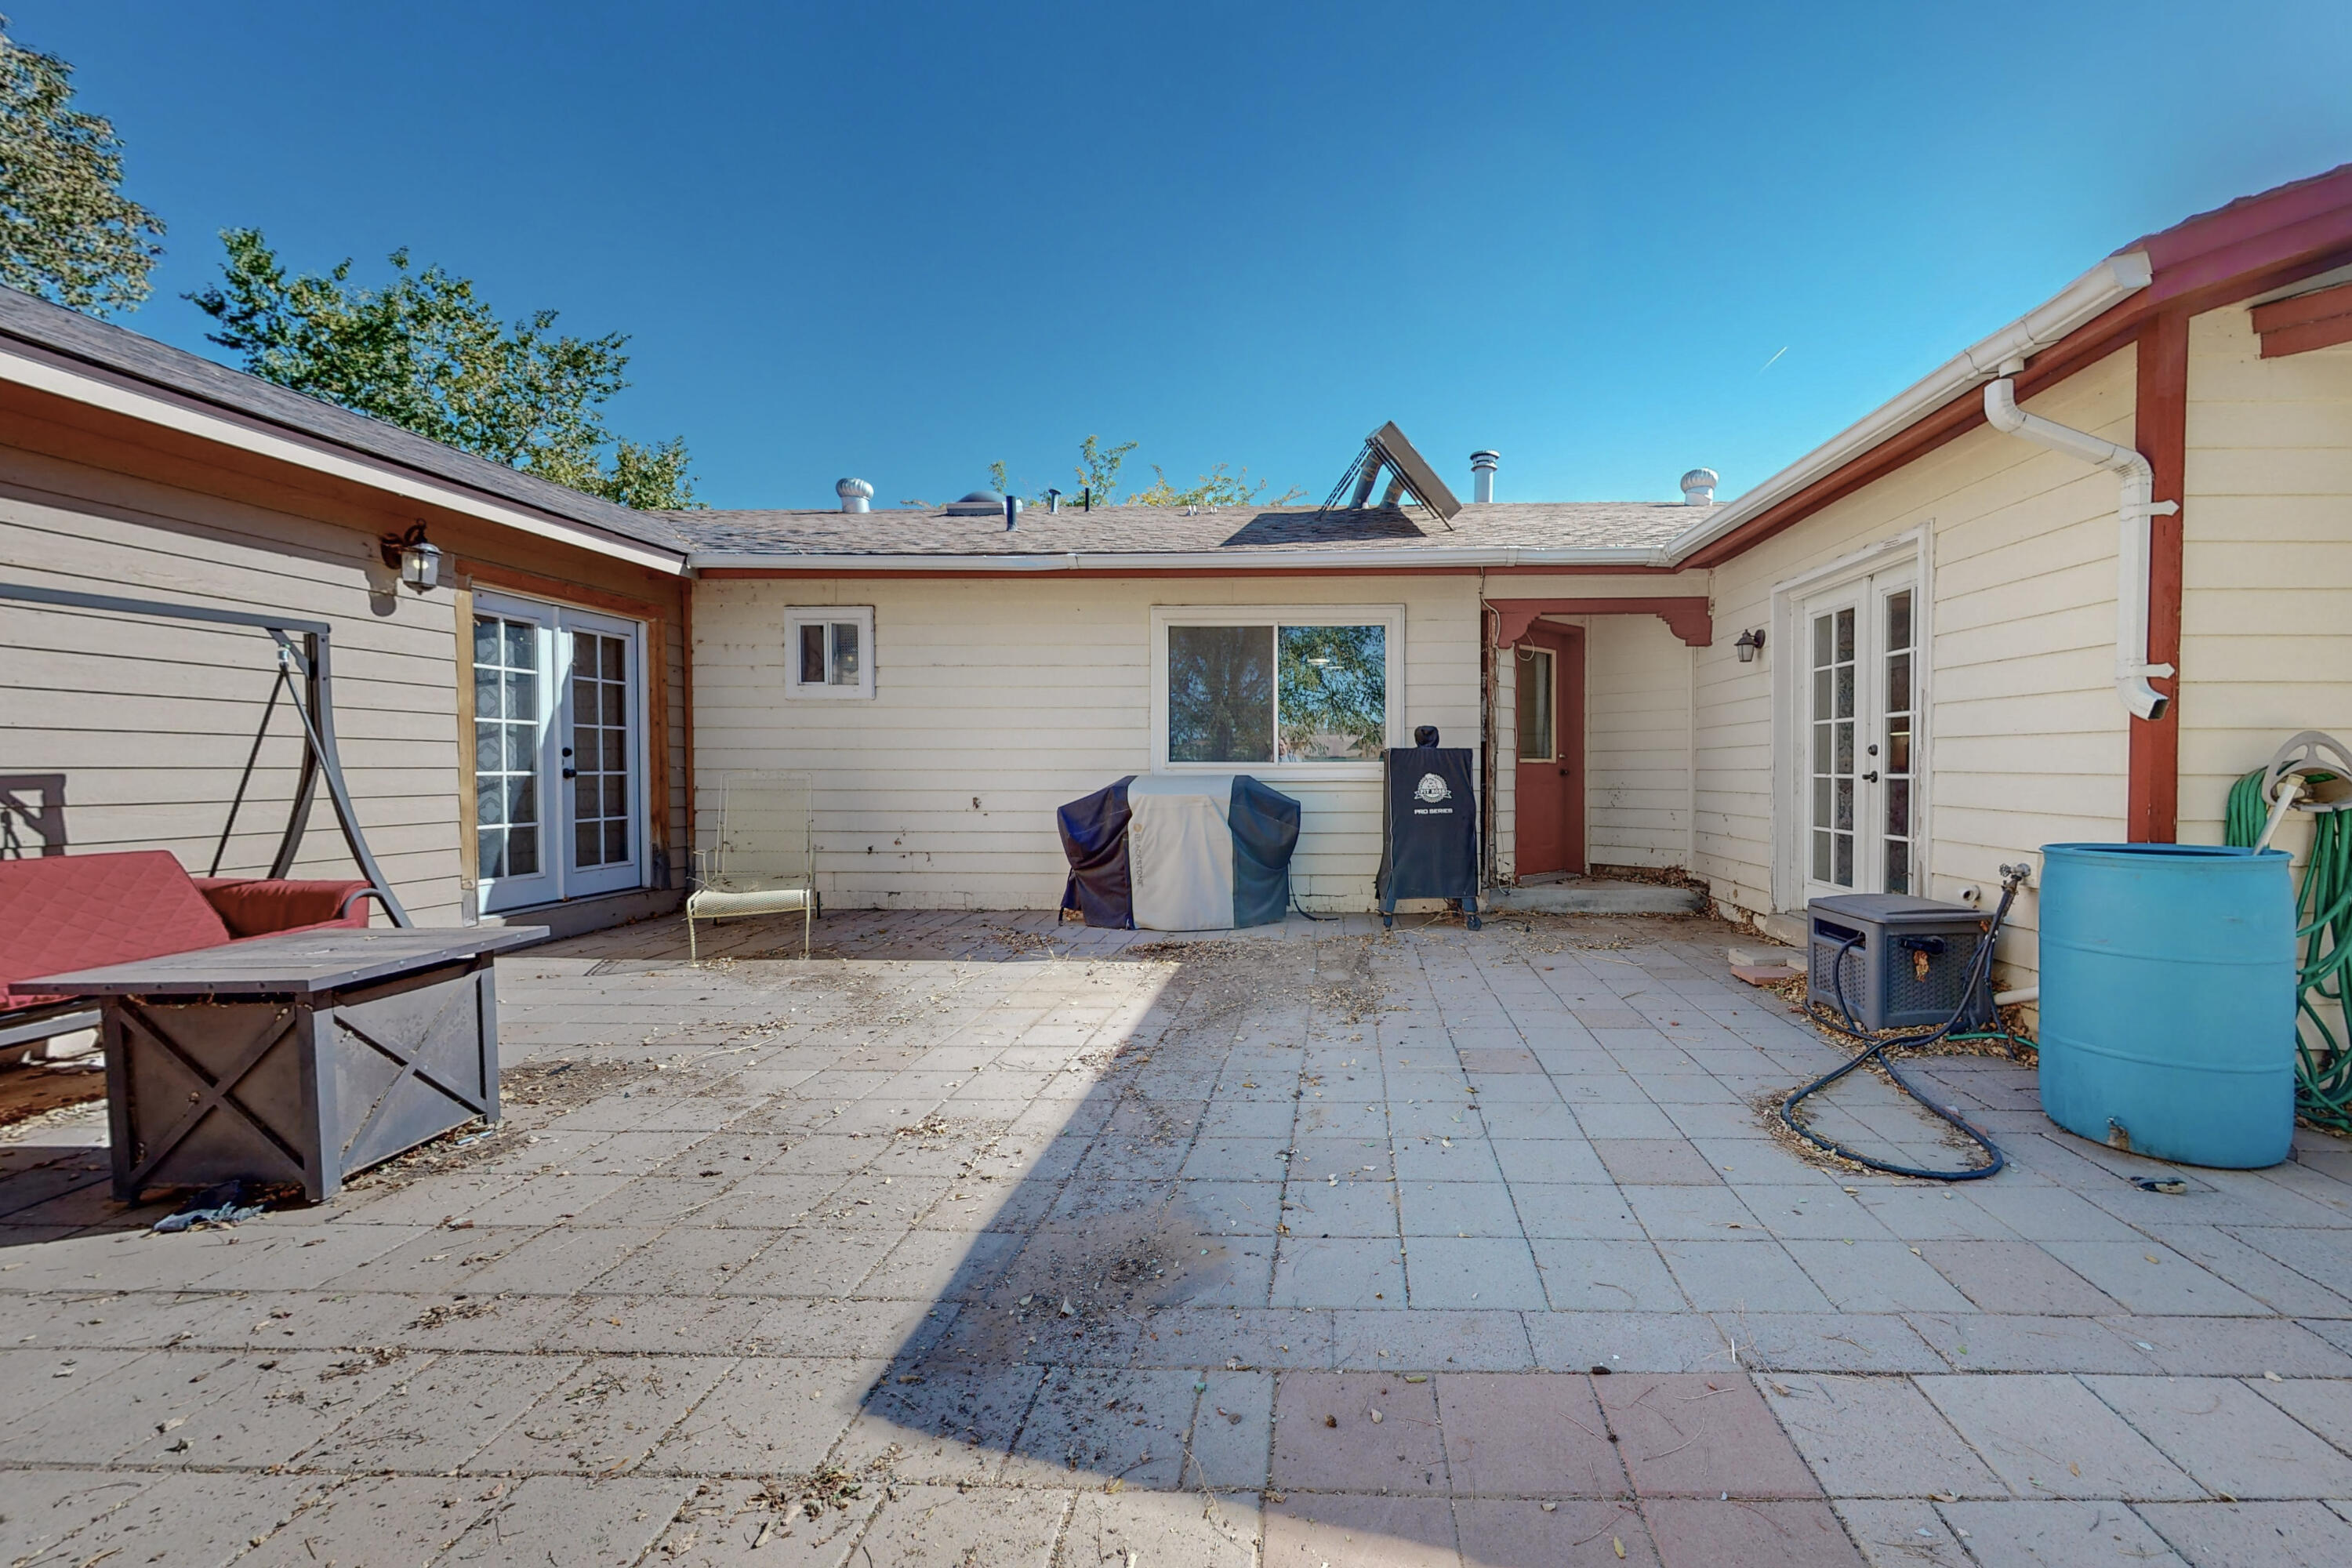 1705 32nd Street SE, Rio Rancho, New Mexico 87124, 3 Bedrooms Bedrooms, ,2 BathroomsBathrooms,Residential,For Sale,1705 32nd Street SE,1043905